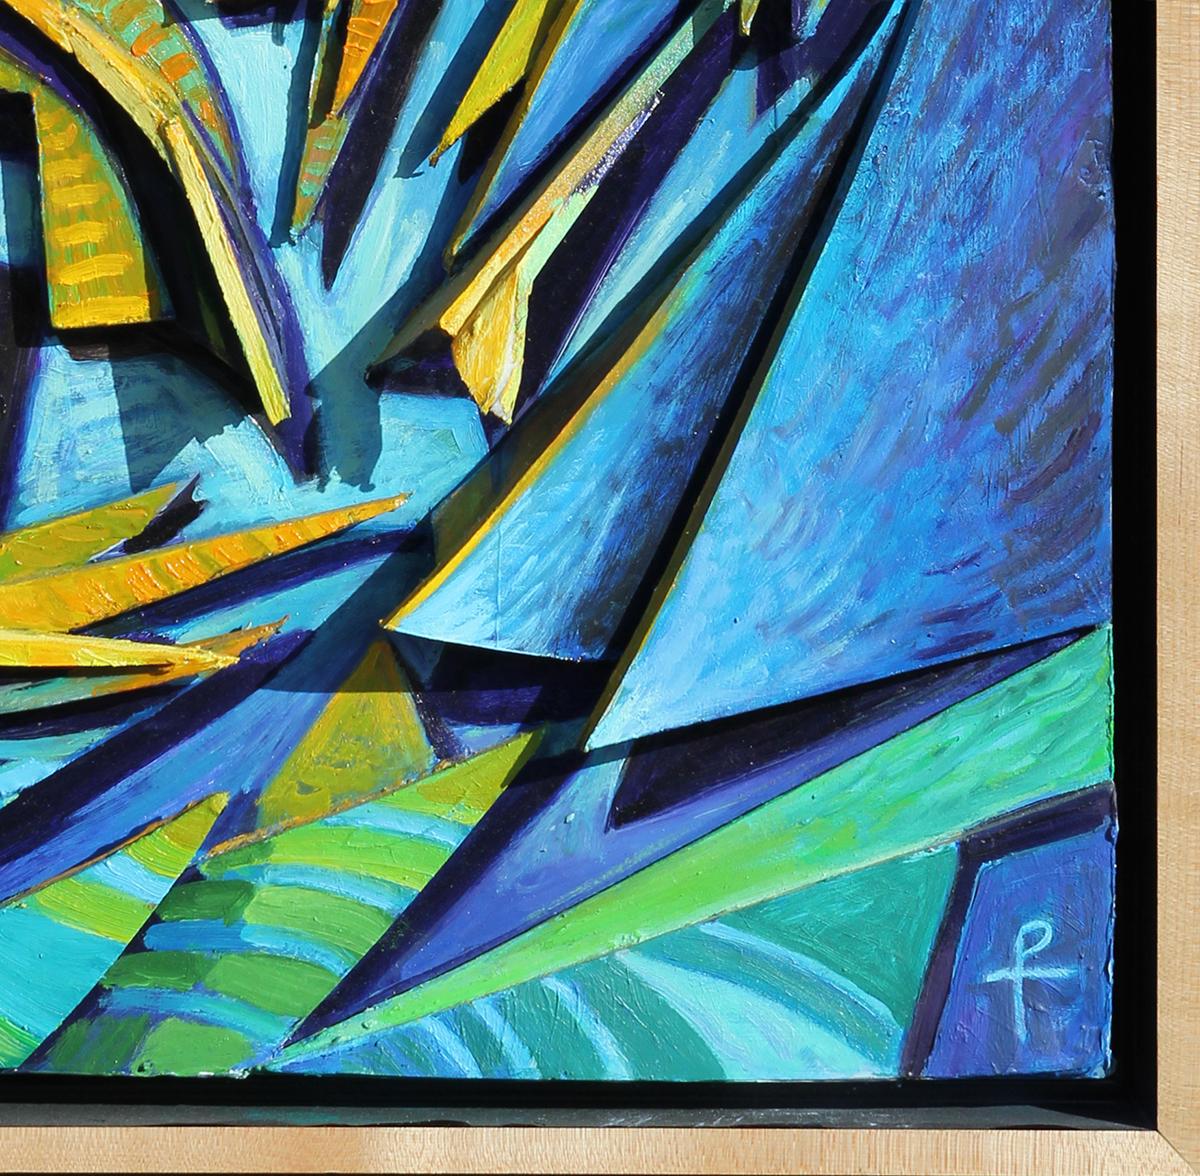 Blue and yellow abstract mixed media landscape painting by contemporary Texas artist Henry David Potwin. The work features a dynamic, three dimensional composition of a sailboat on choppy seas. Signed in front lower right corner. Currently hung in a